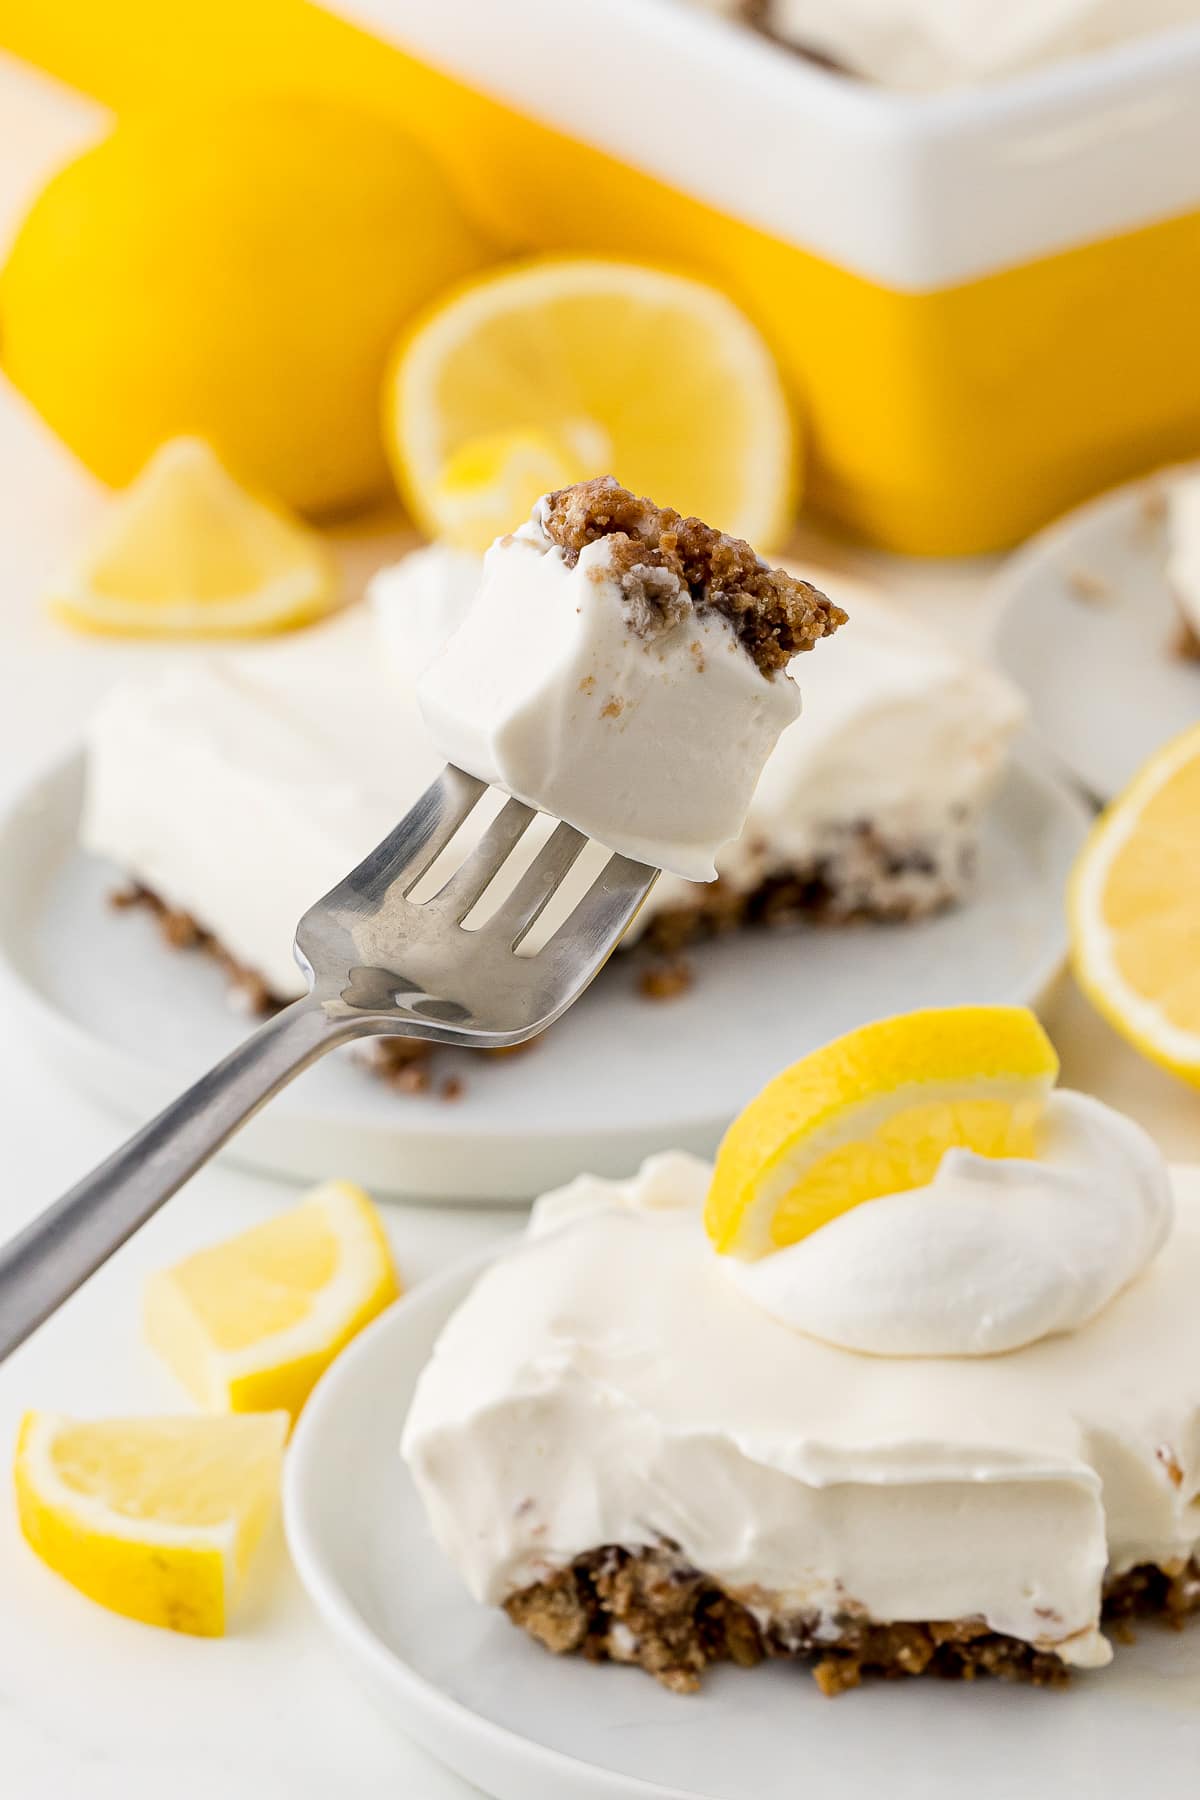 A fork holding a bite of lemon pie with additional plates of pie and lemons in the background